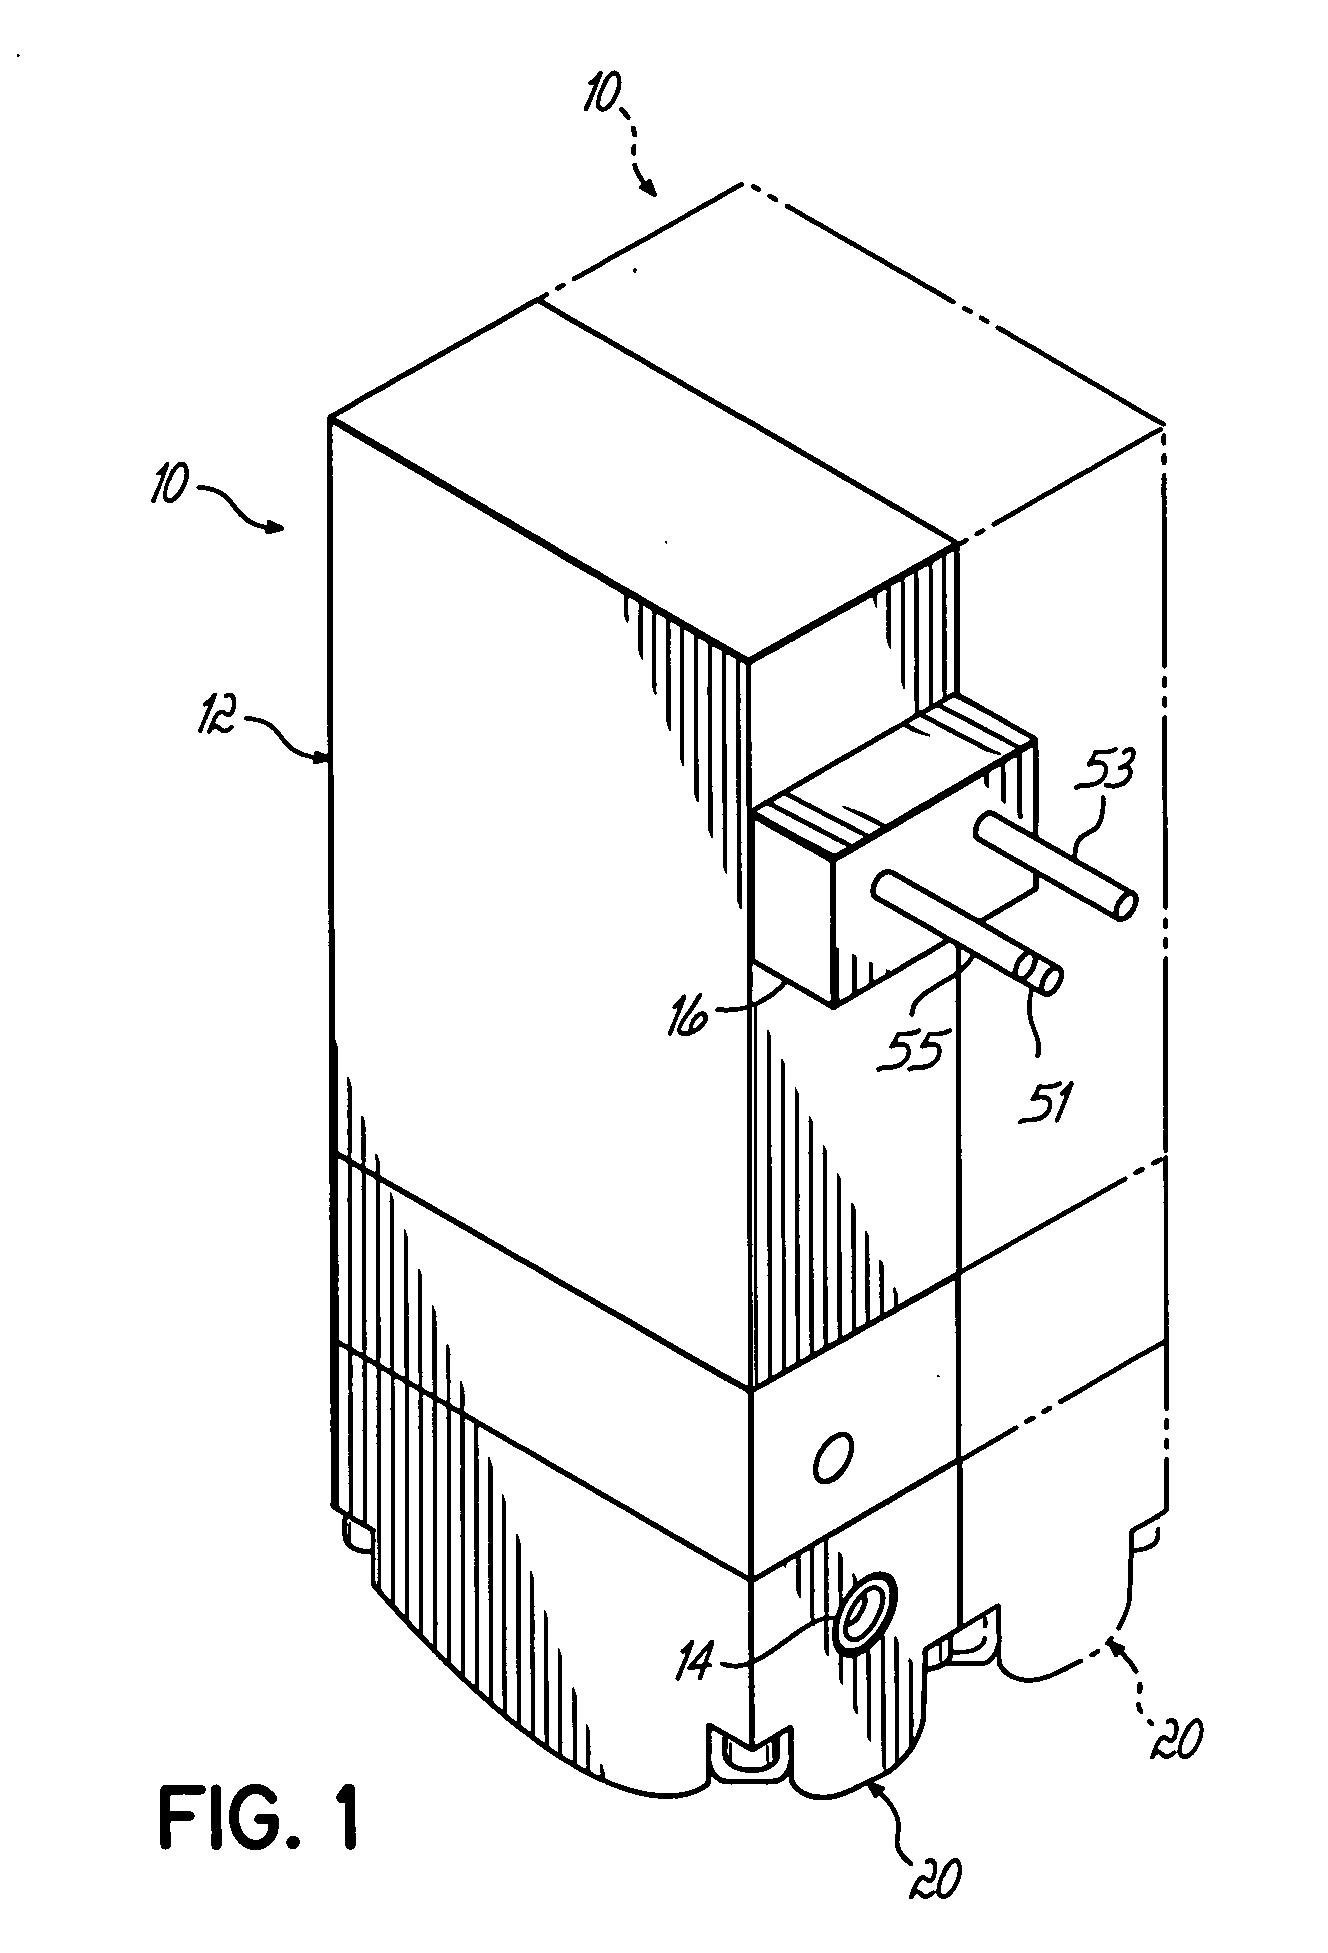 Electrically-operated dispenser